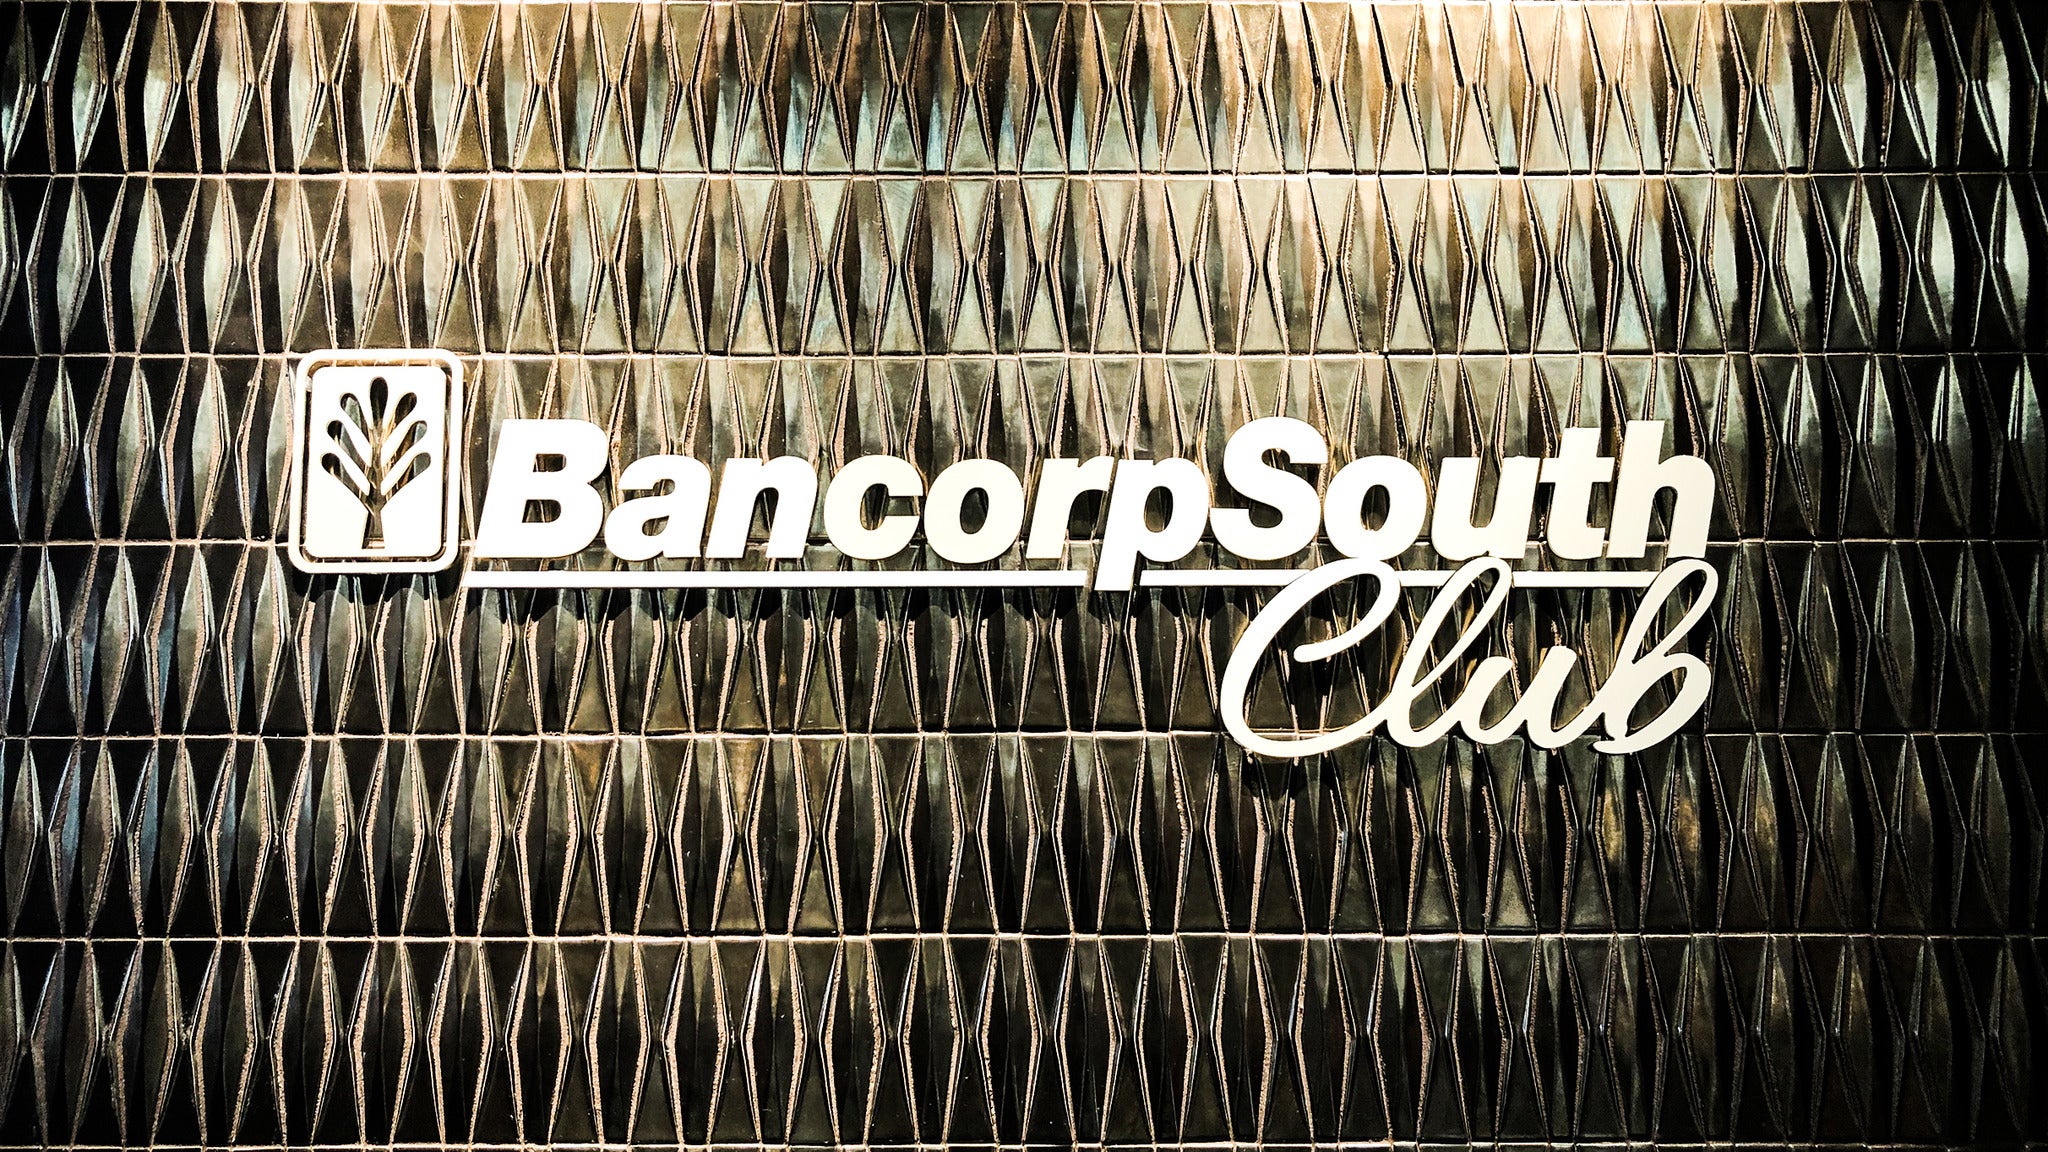 The BancorpSouth Club Experience: Nov 5, 2021 in Tupelo promo photo for Advance presale offer code